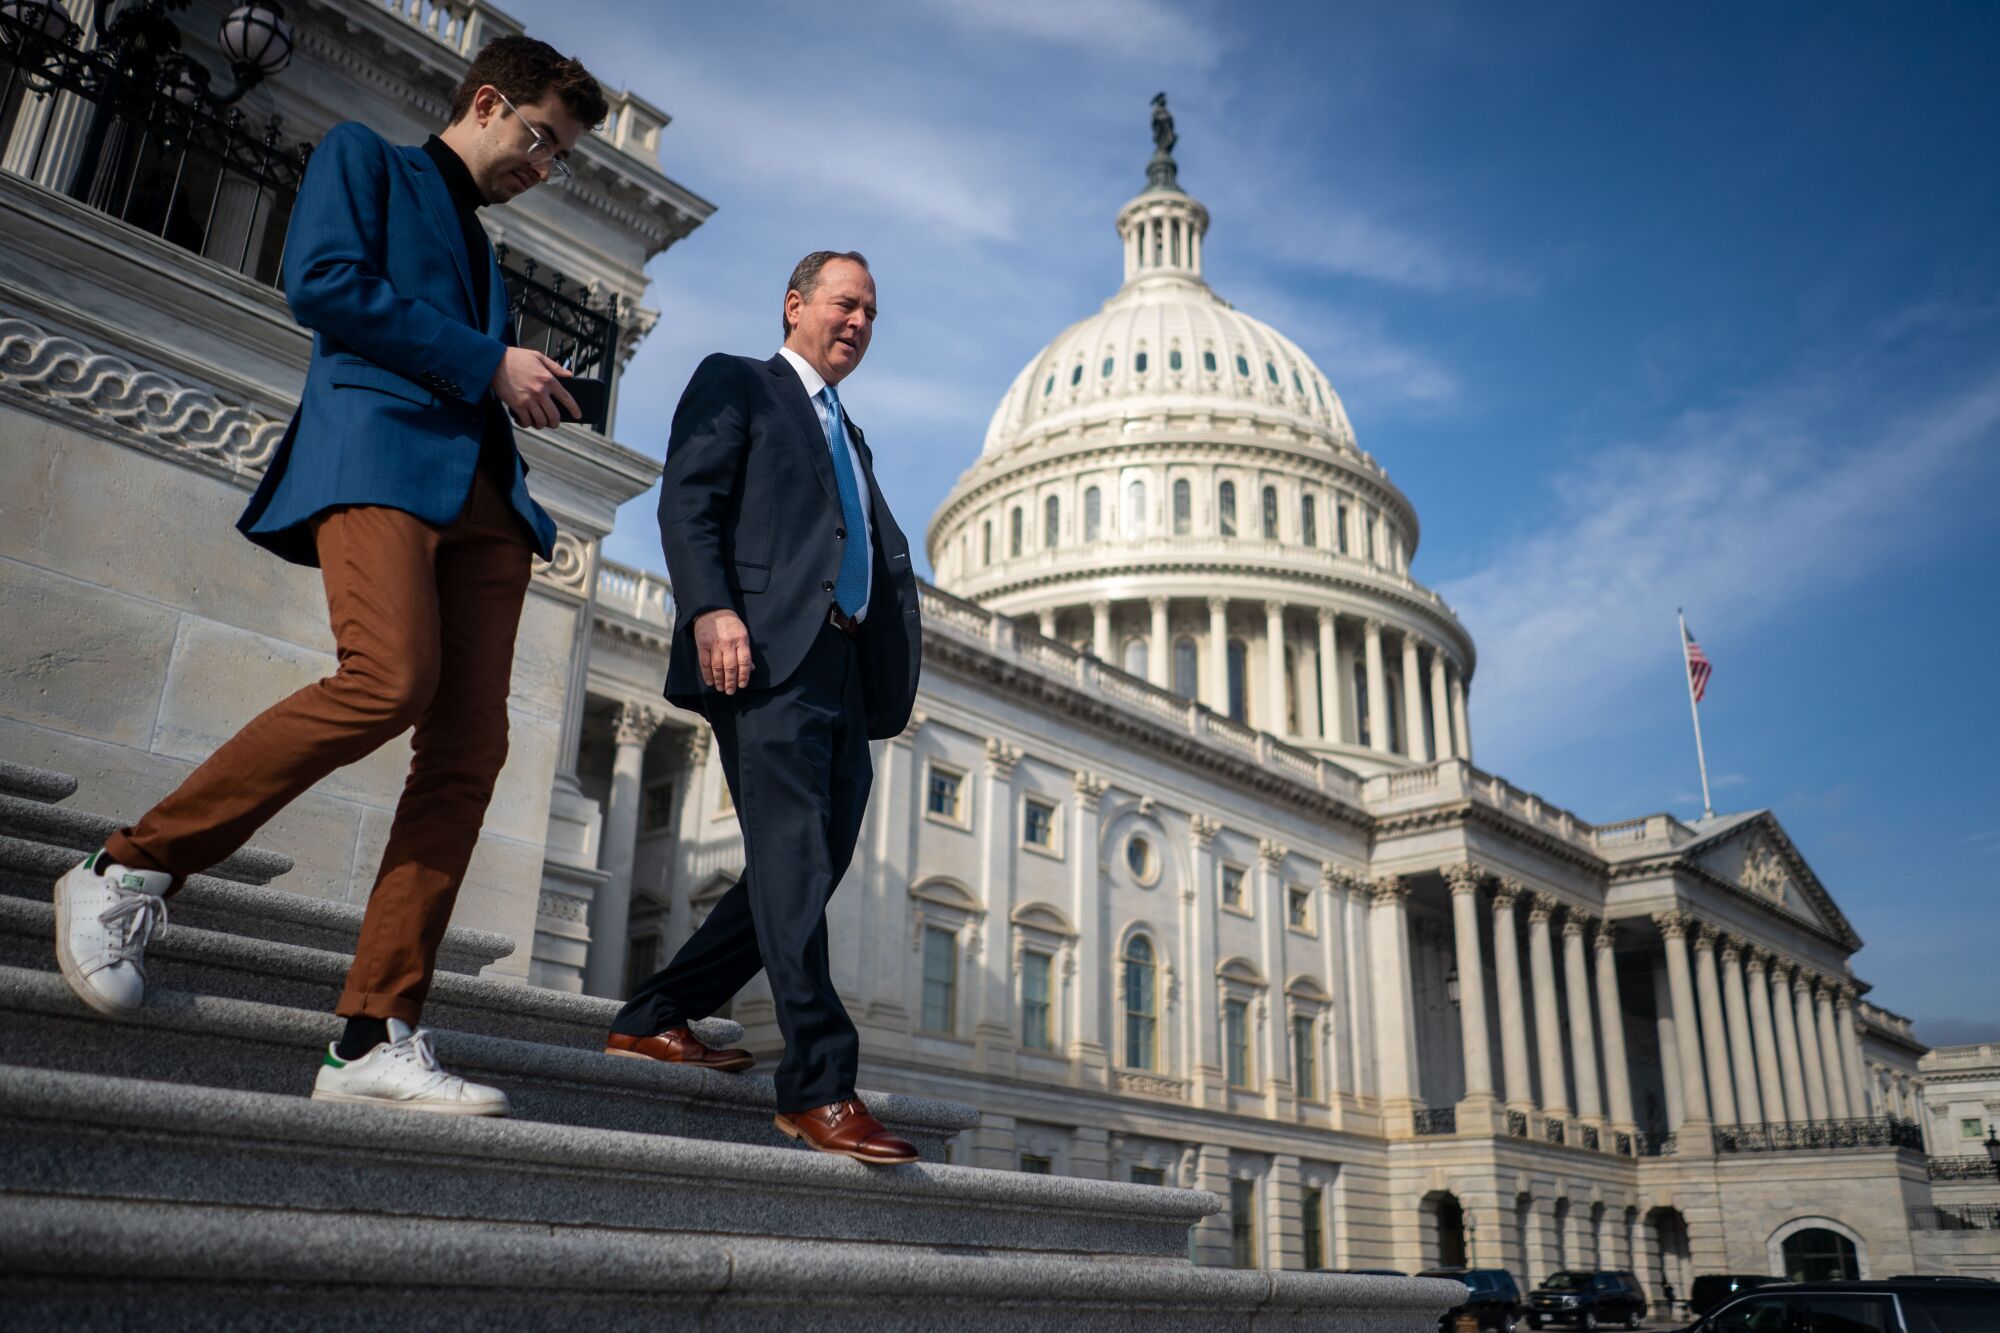 Rep. Adam Schiff speaks with a reporter as he walks down the steps of the US Capitol.